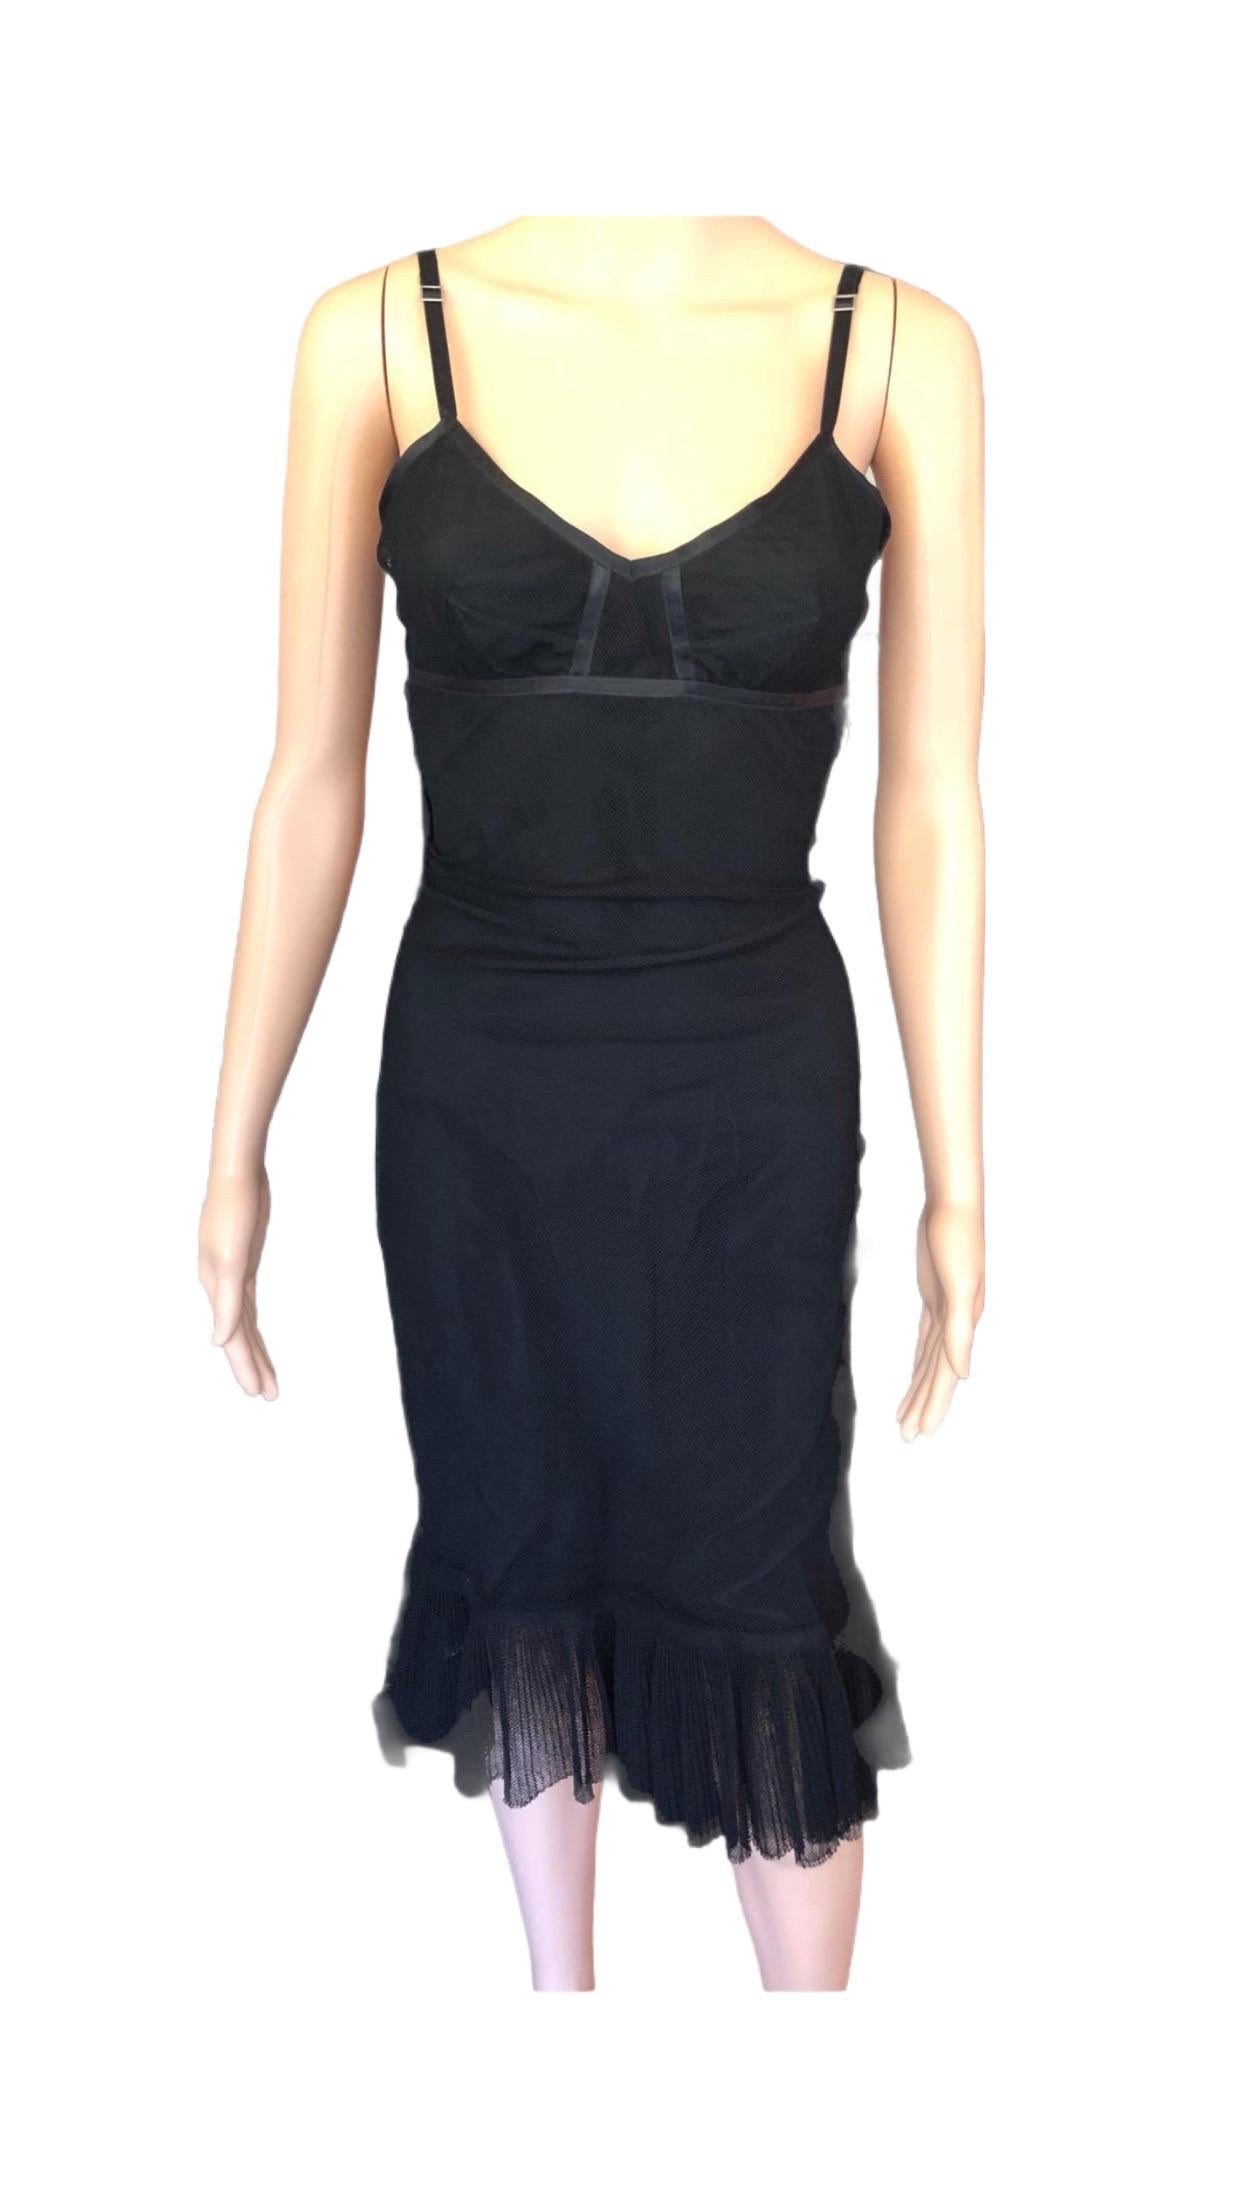 Gucci by Tom Ford F/W 2001 Cutout Back Mesh Black Dress For Sale 3